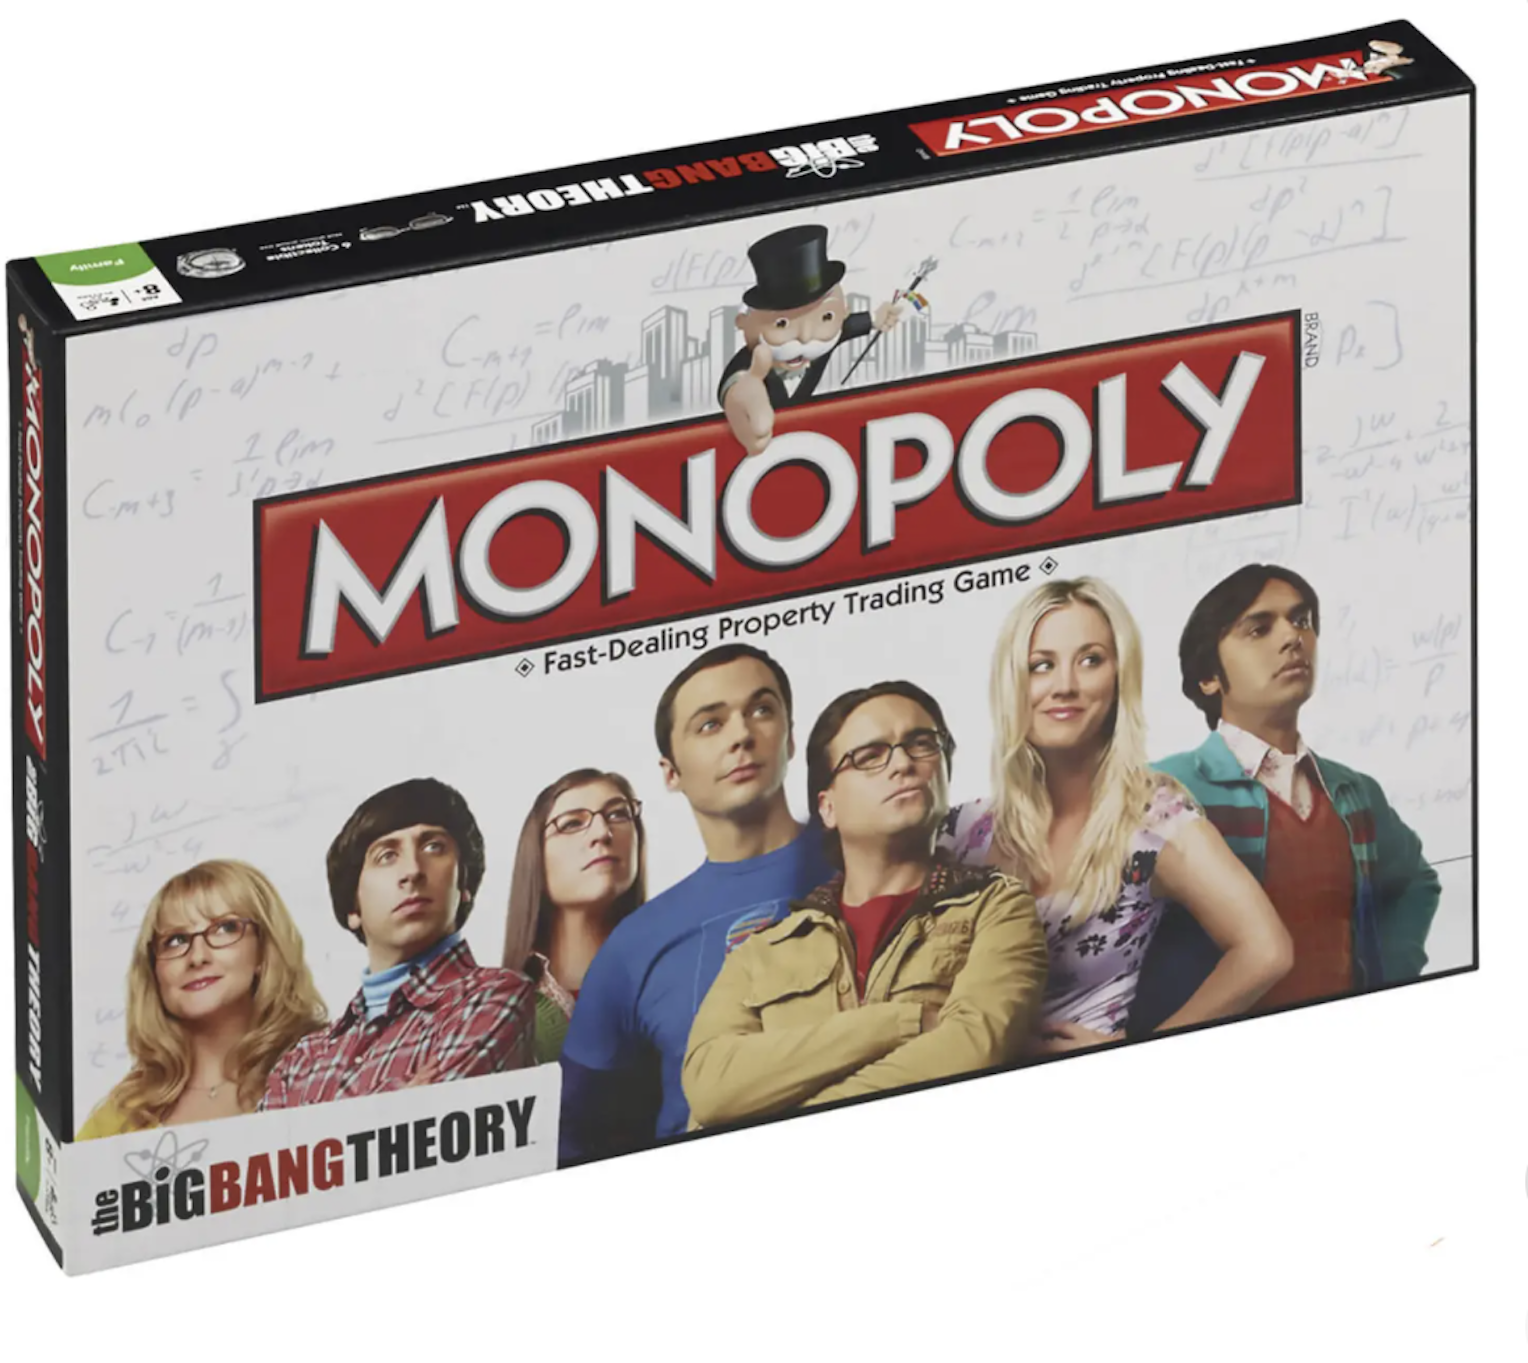 The Big Bang Theory for sale online Monopoly Board Game 